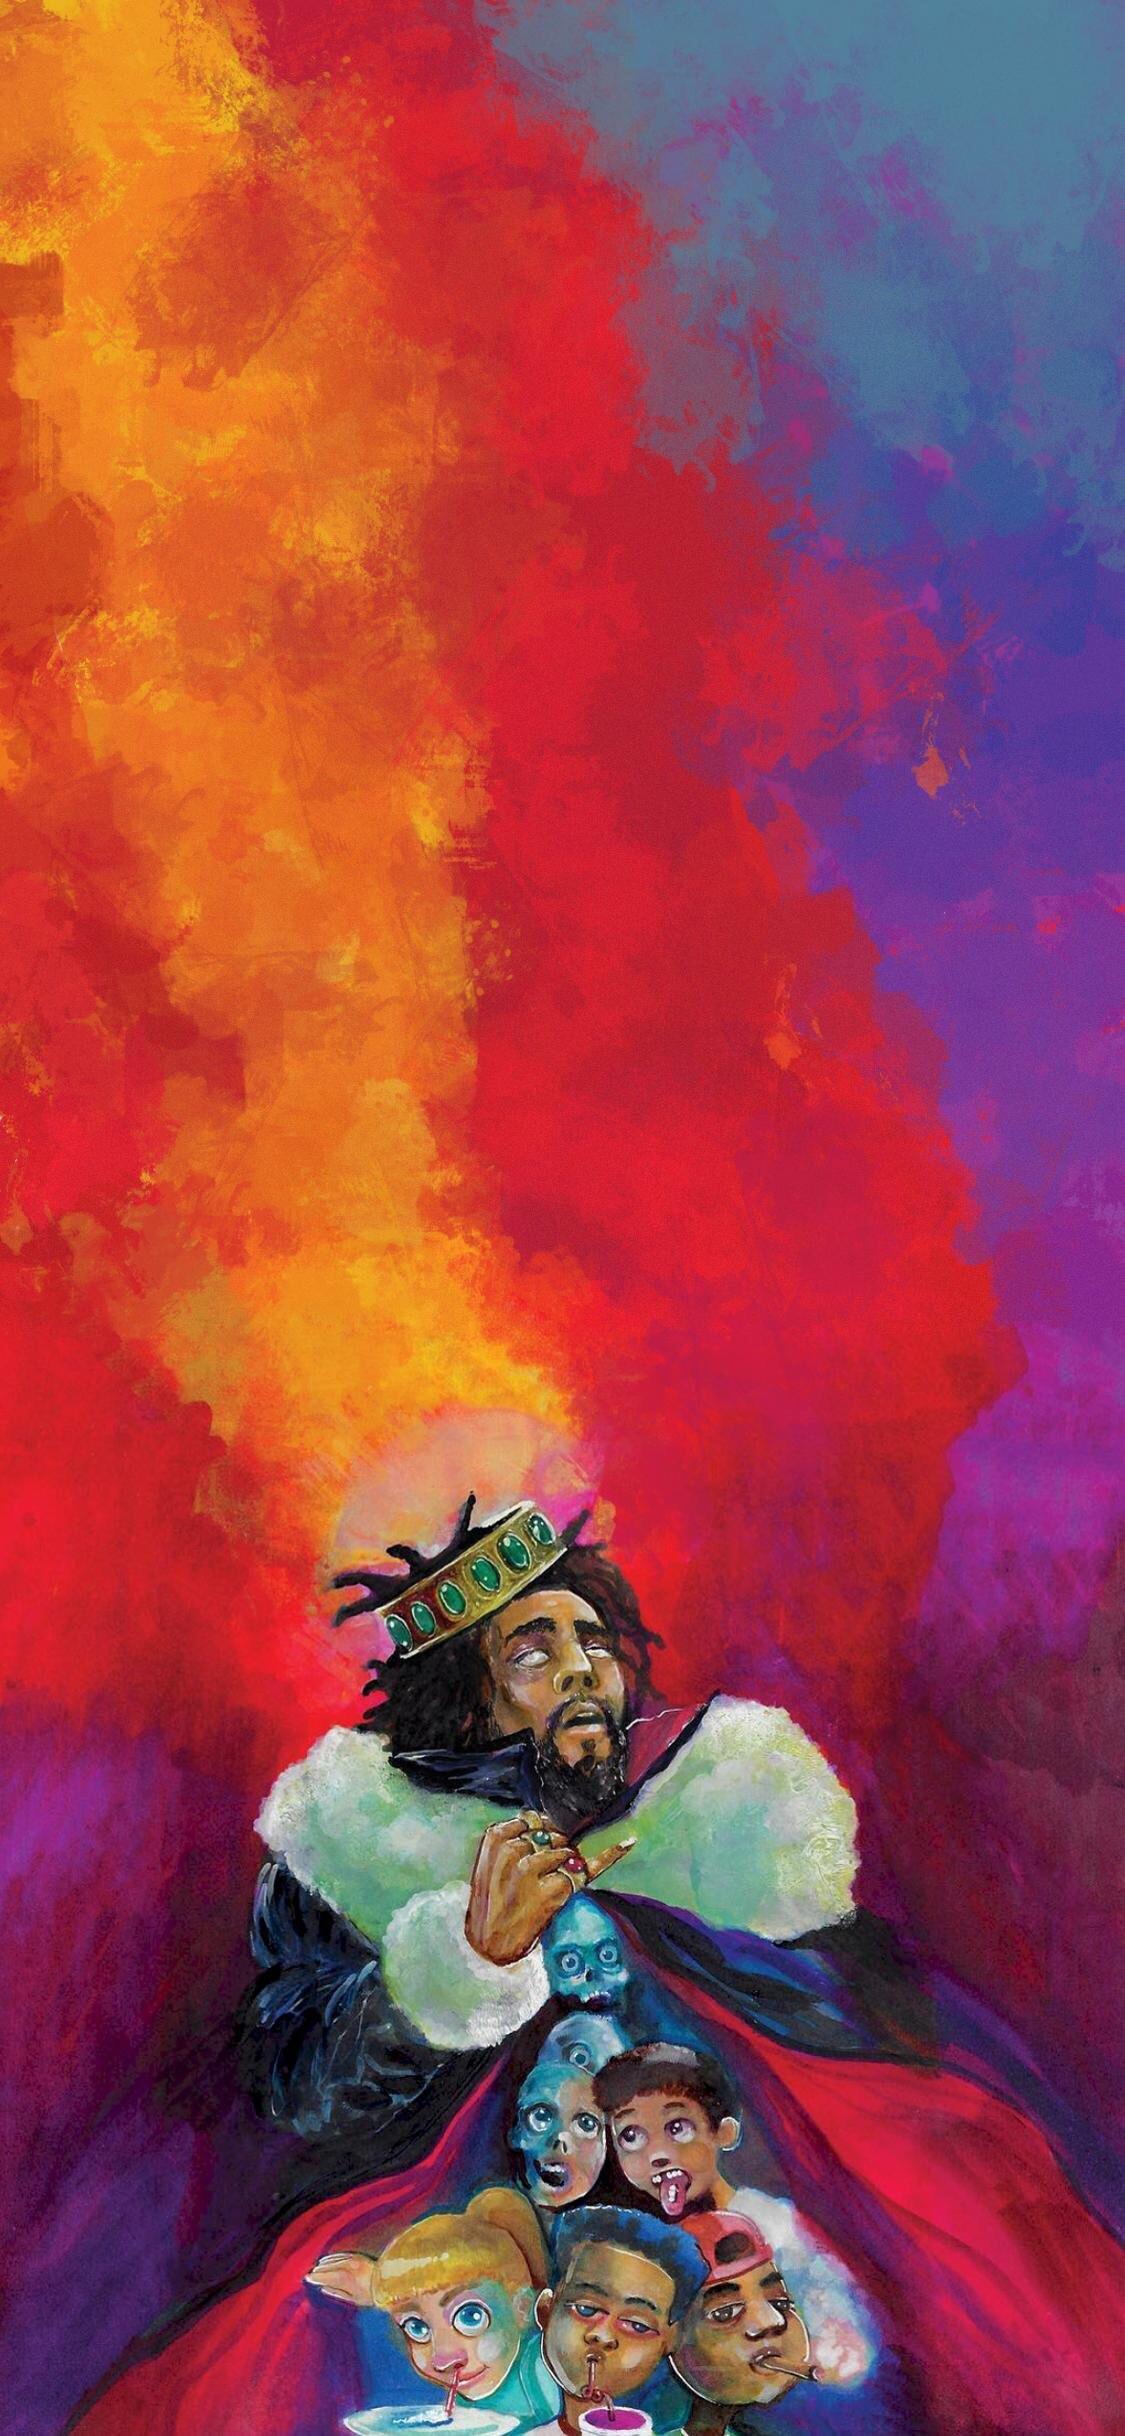 KOD wallpaper for iPhone i found Jcole